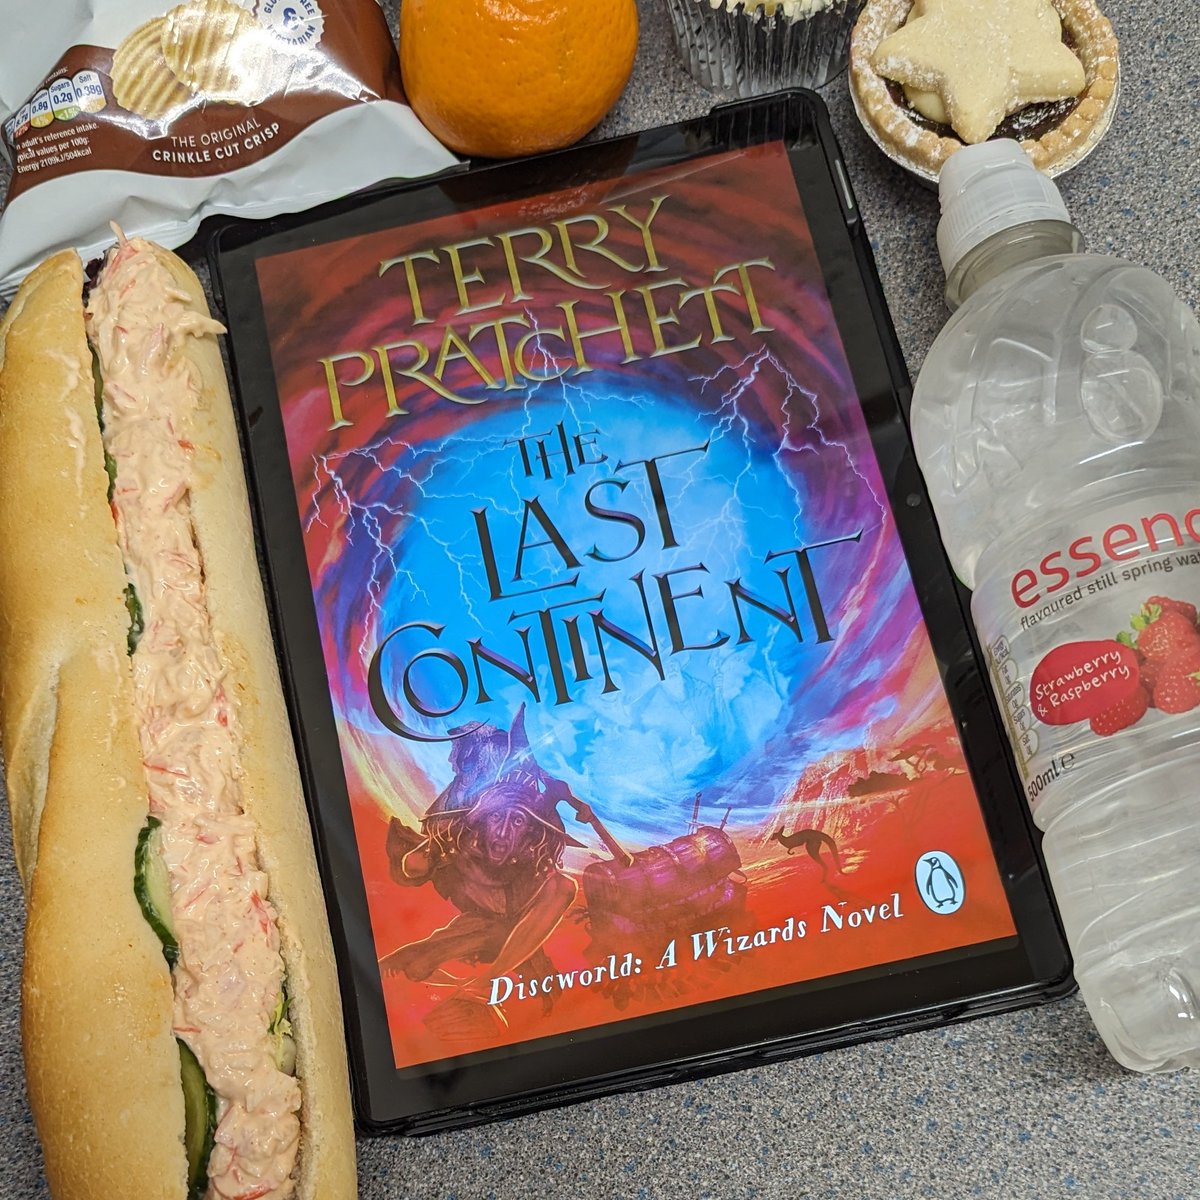 Back to the #GreatPratchettReread for #LunchtimeReading and we're back with our favourite Wizzard, Rincewind, in The Last Continent!

Still, no worries, eh?

#Pratchett #TwitterBooks #WritingCommunity